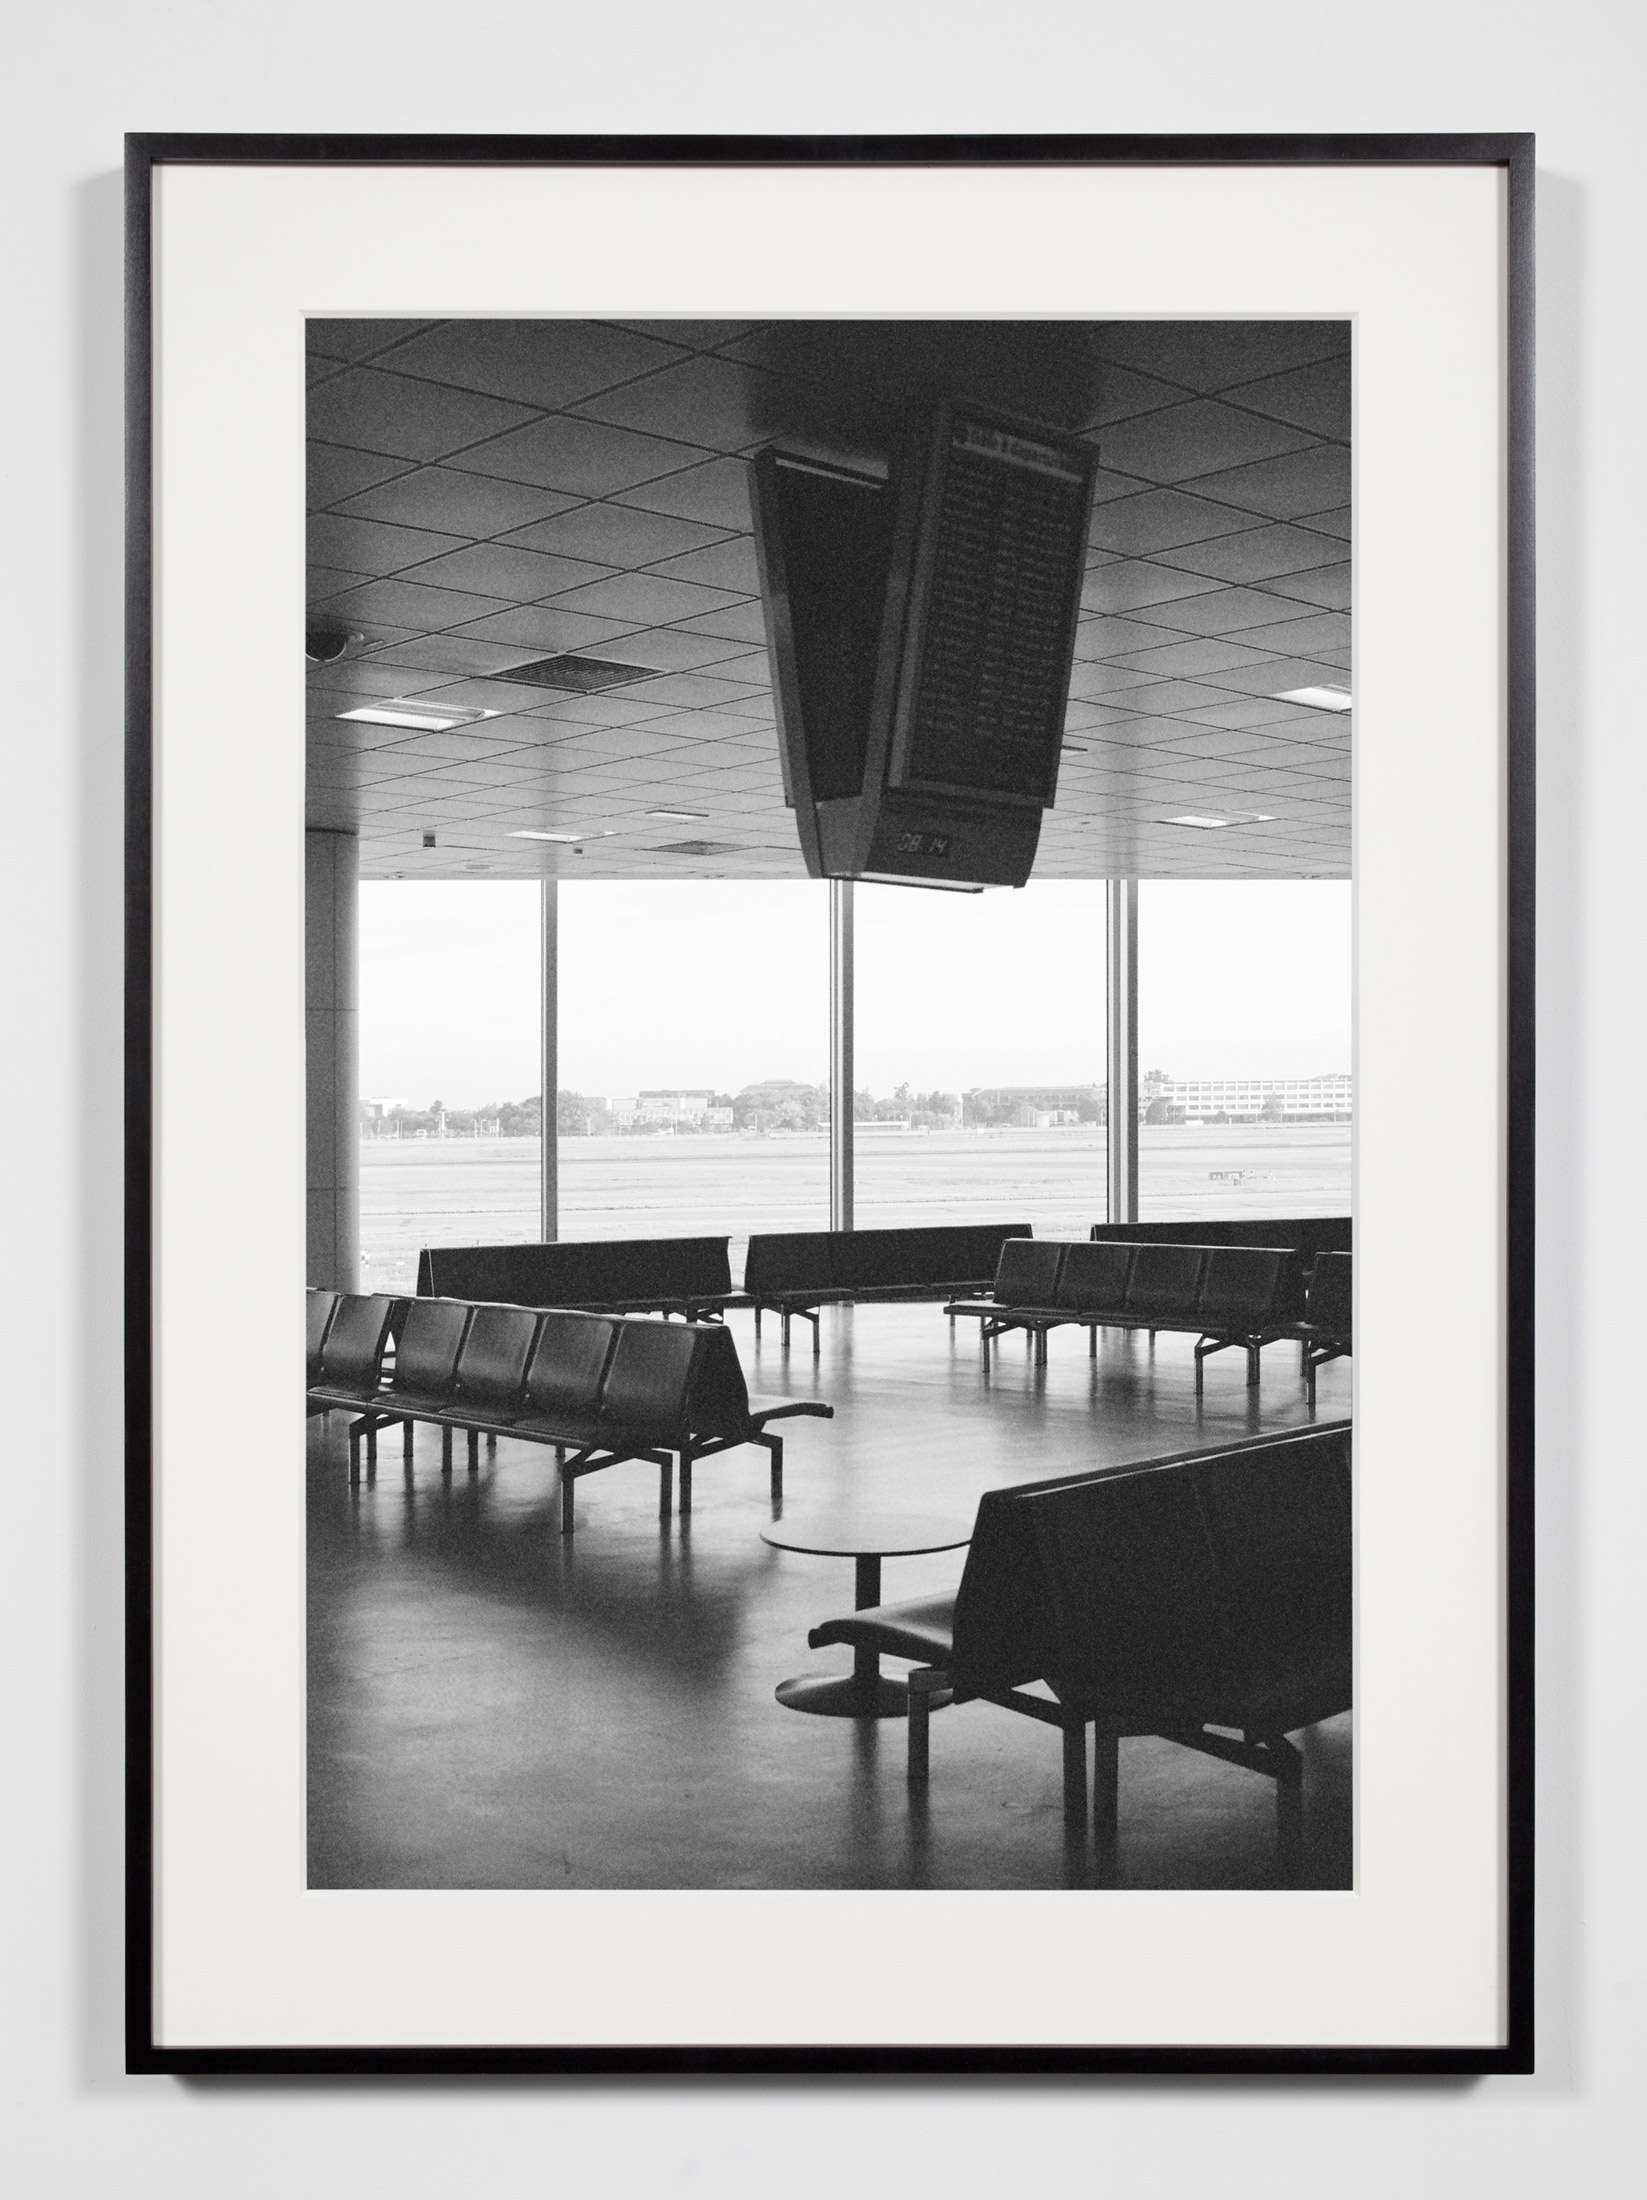   Airport Lounge, Belfast, Ireland, September 10, 2010   2011  Epson Ultrachrome K3 archival ink jet print on Hahnemühle Photo Rag paper  36 3/8 x 26 3/8 inches   Industrial Portraits, 2008–    A Diagram of Forces, 2011     